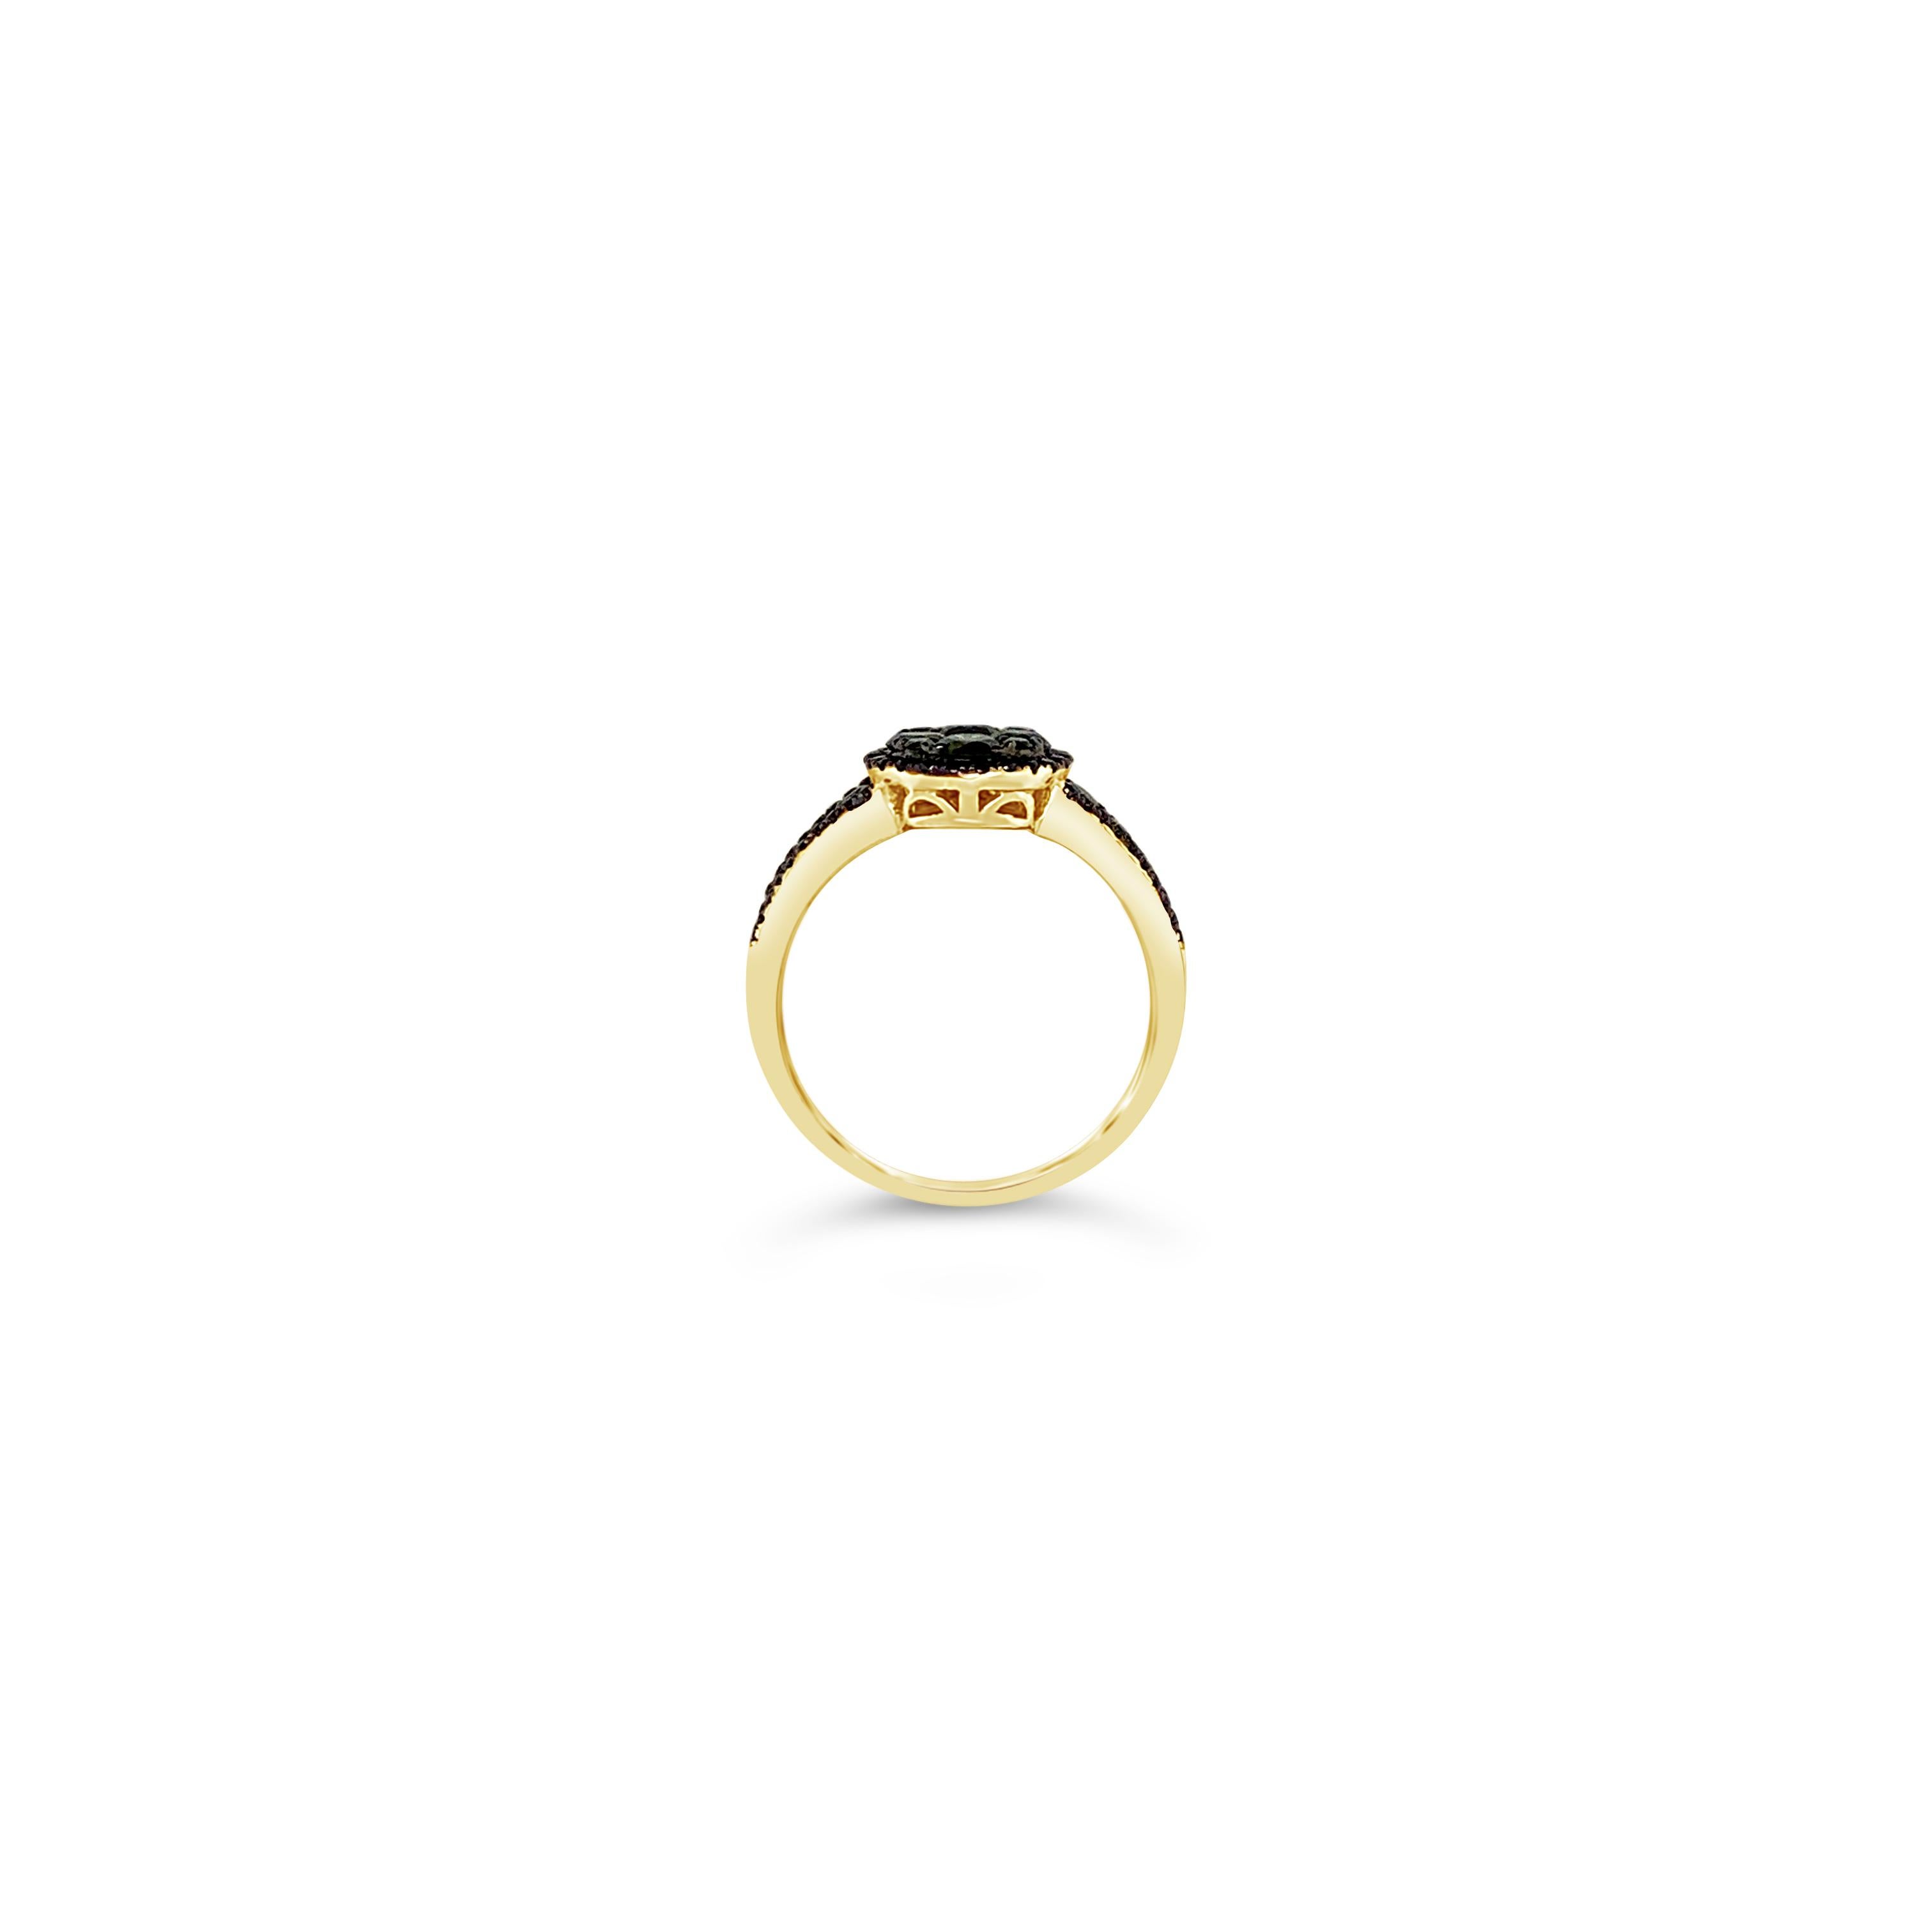 Le Vian Exotics® Ring featuring .79 cts. Green Diamonds, .25 cts. Black Diamonds set in 14K Honey Gold™. 
Please feel free to reach out with any questions! Item comes with a Le Vian® jewelry box as well as a Le Vian® suede pouch! 
Ring Size 7 
Ring